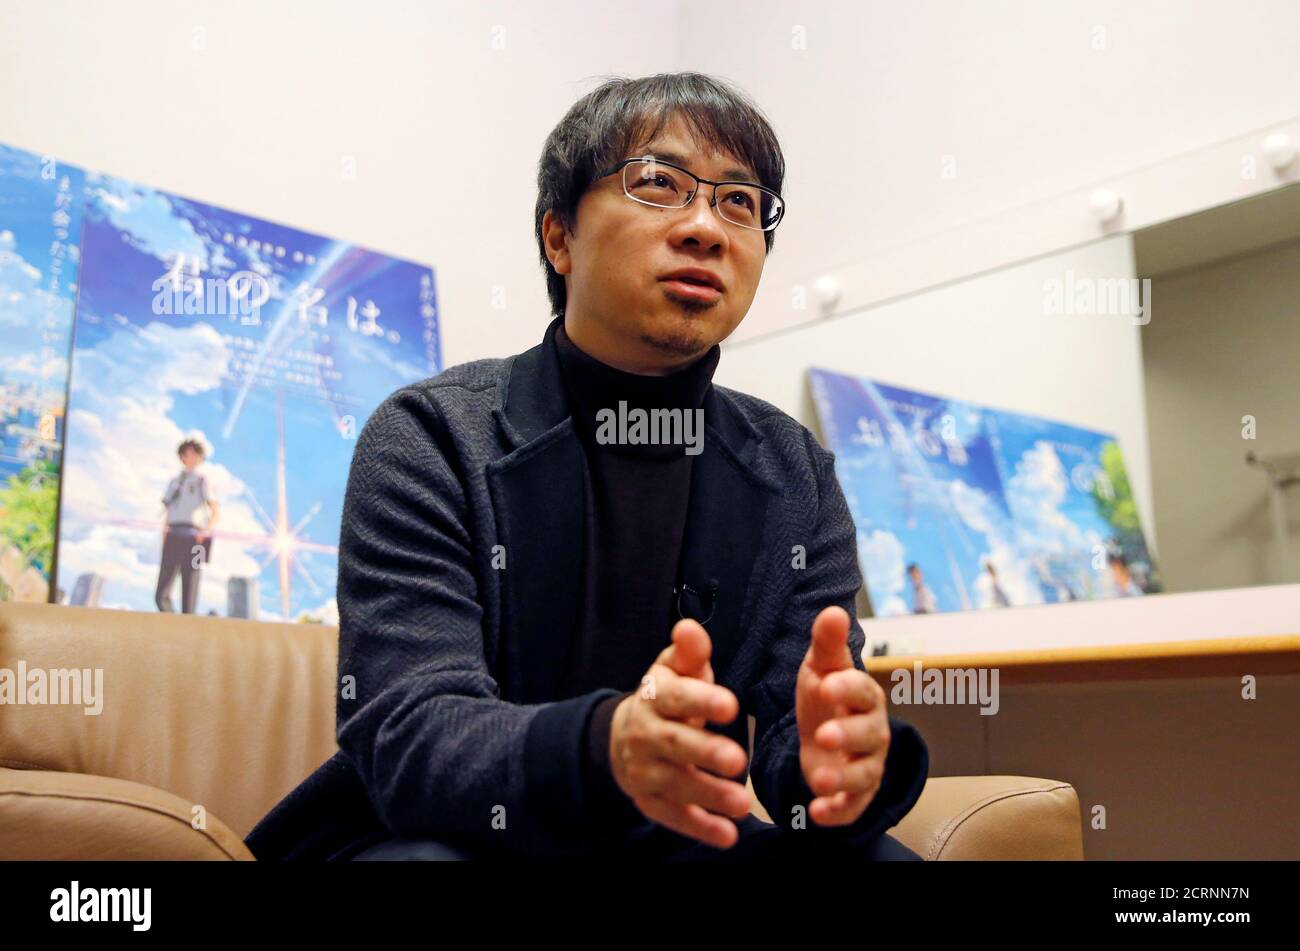 Japanese anime director Makoto Shinkai speaks about his animated film 'Your  Name' during an interview with Reuters in Tokyo, Japan, November 16, 2016.  Picture taken November 16, 2016. REUTERS/Toru Hanai Stock Photo - Alamy